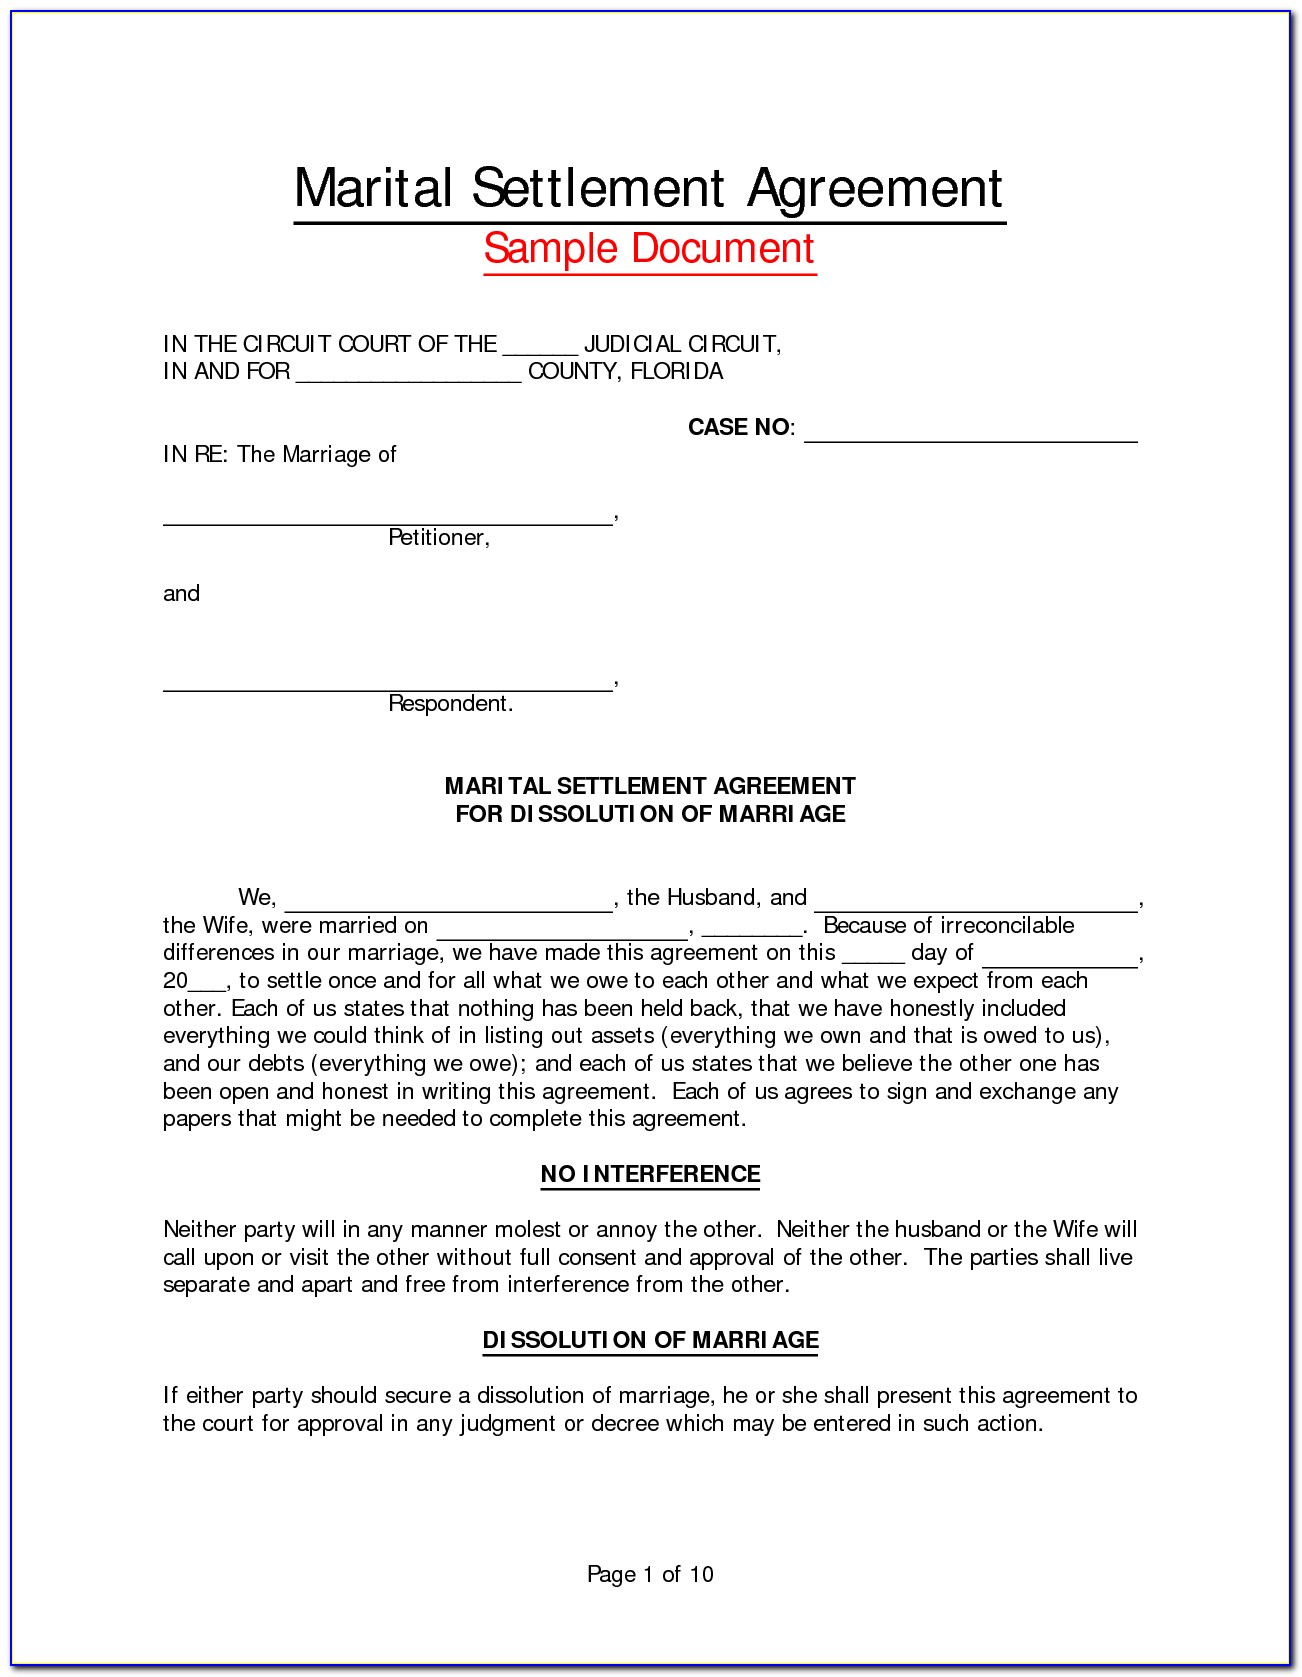 Marriage Contract Sample Form Philippines